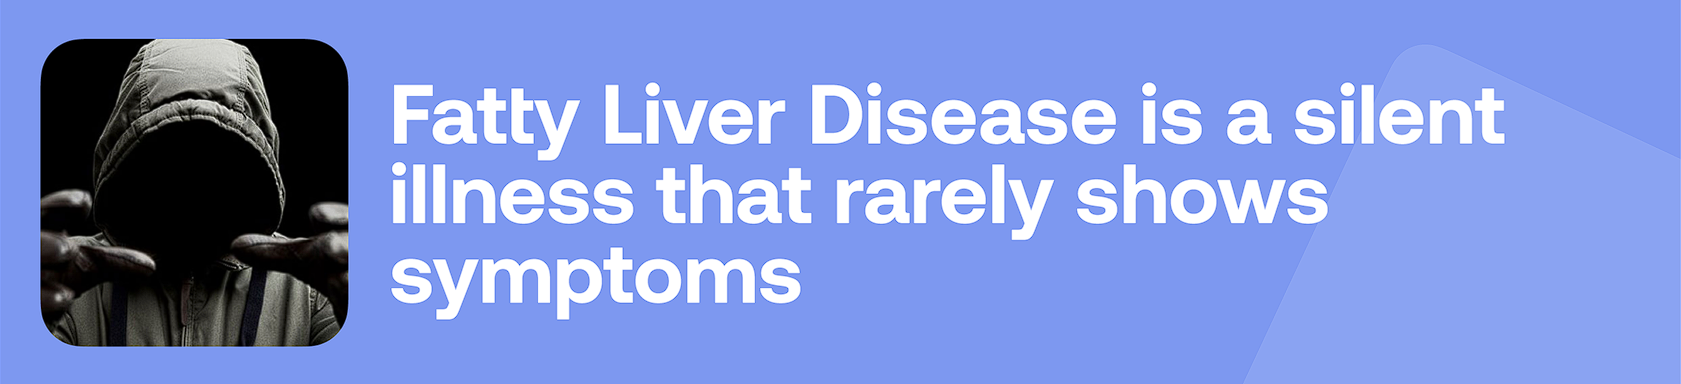 Fatty Liver Disease is a silent illness that rarely shows symptoms